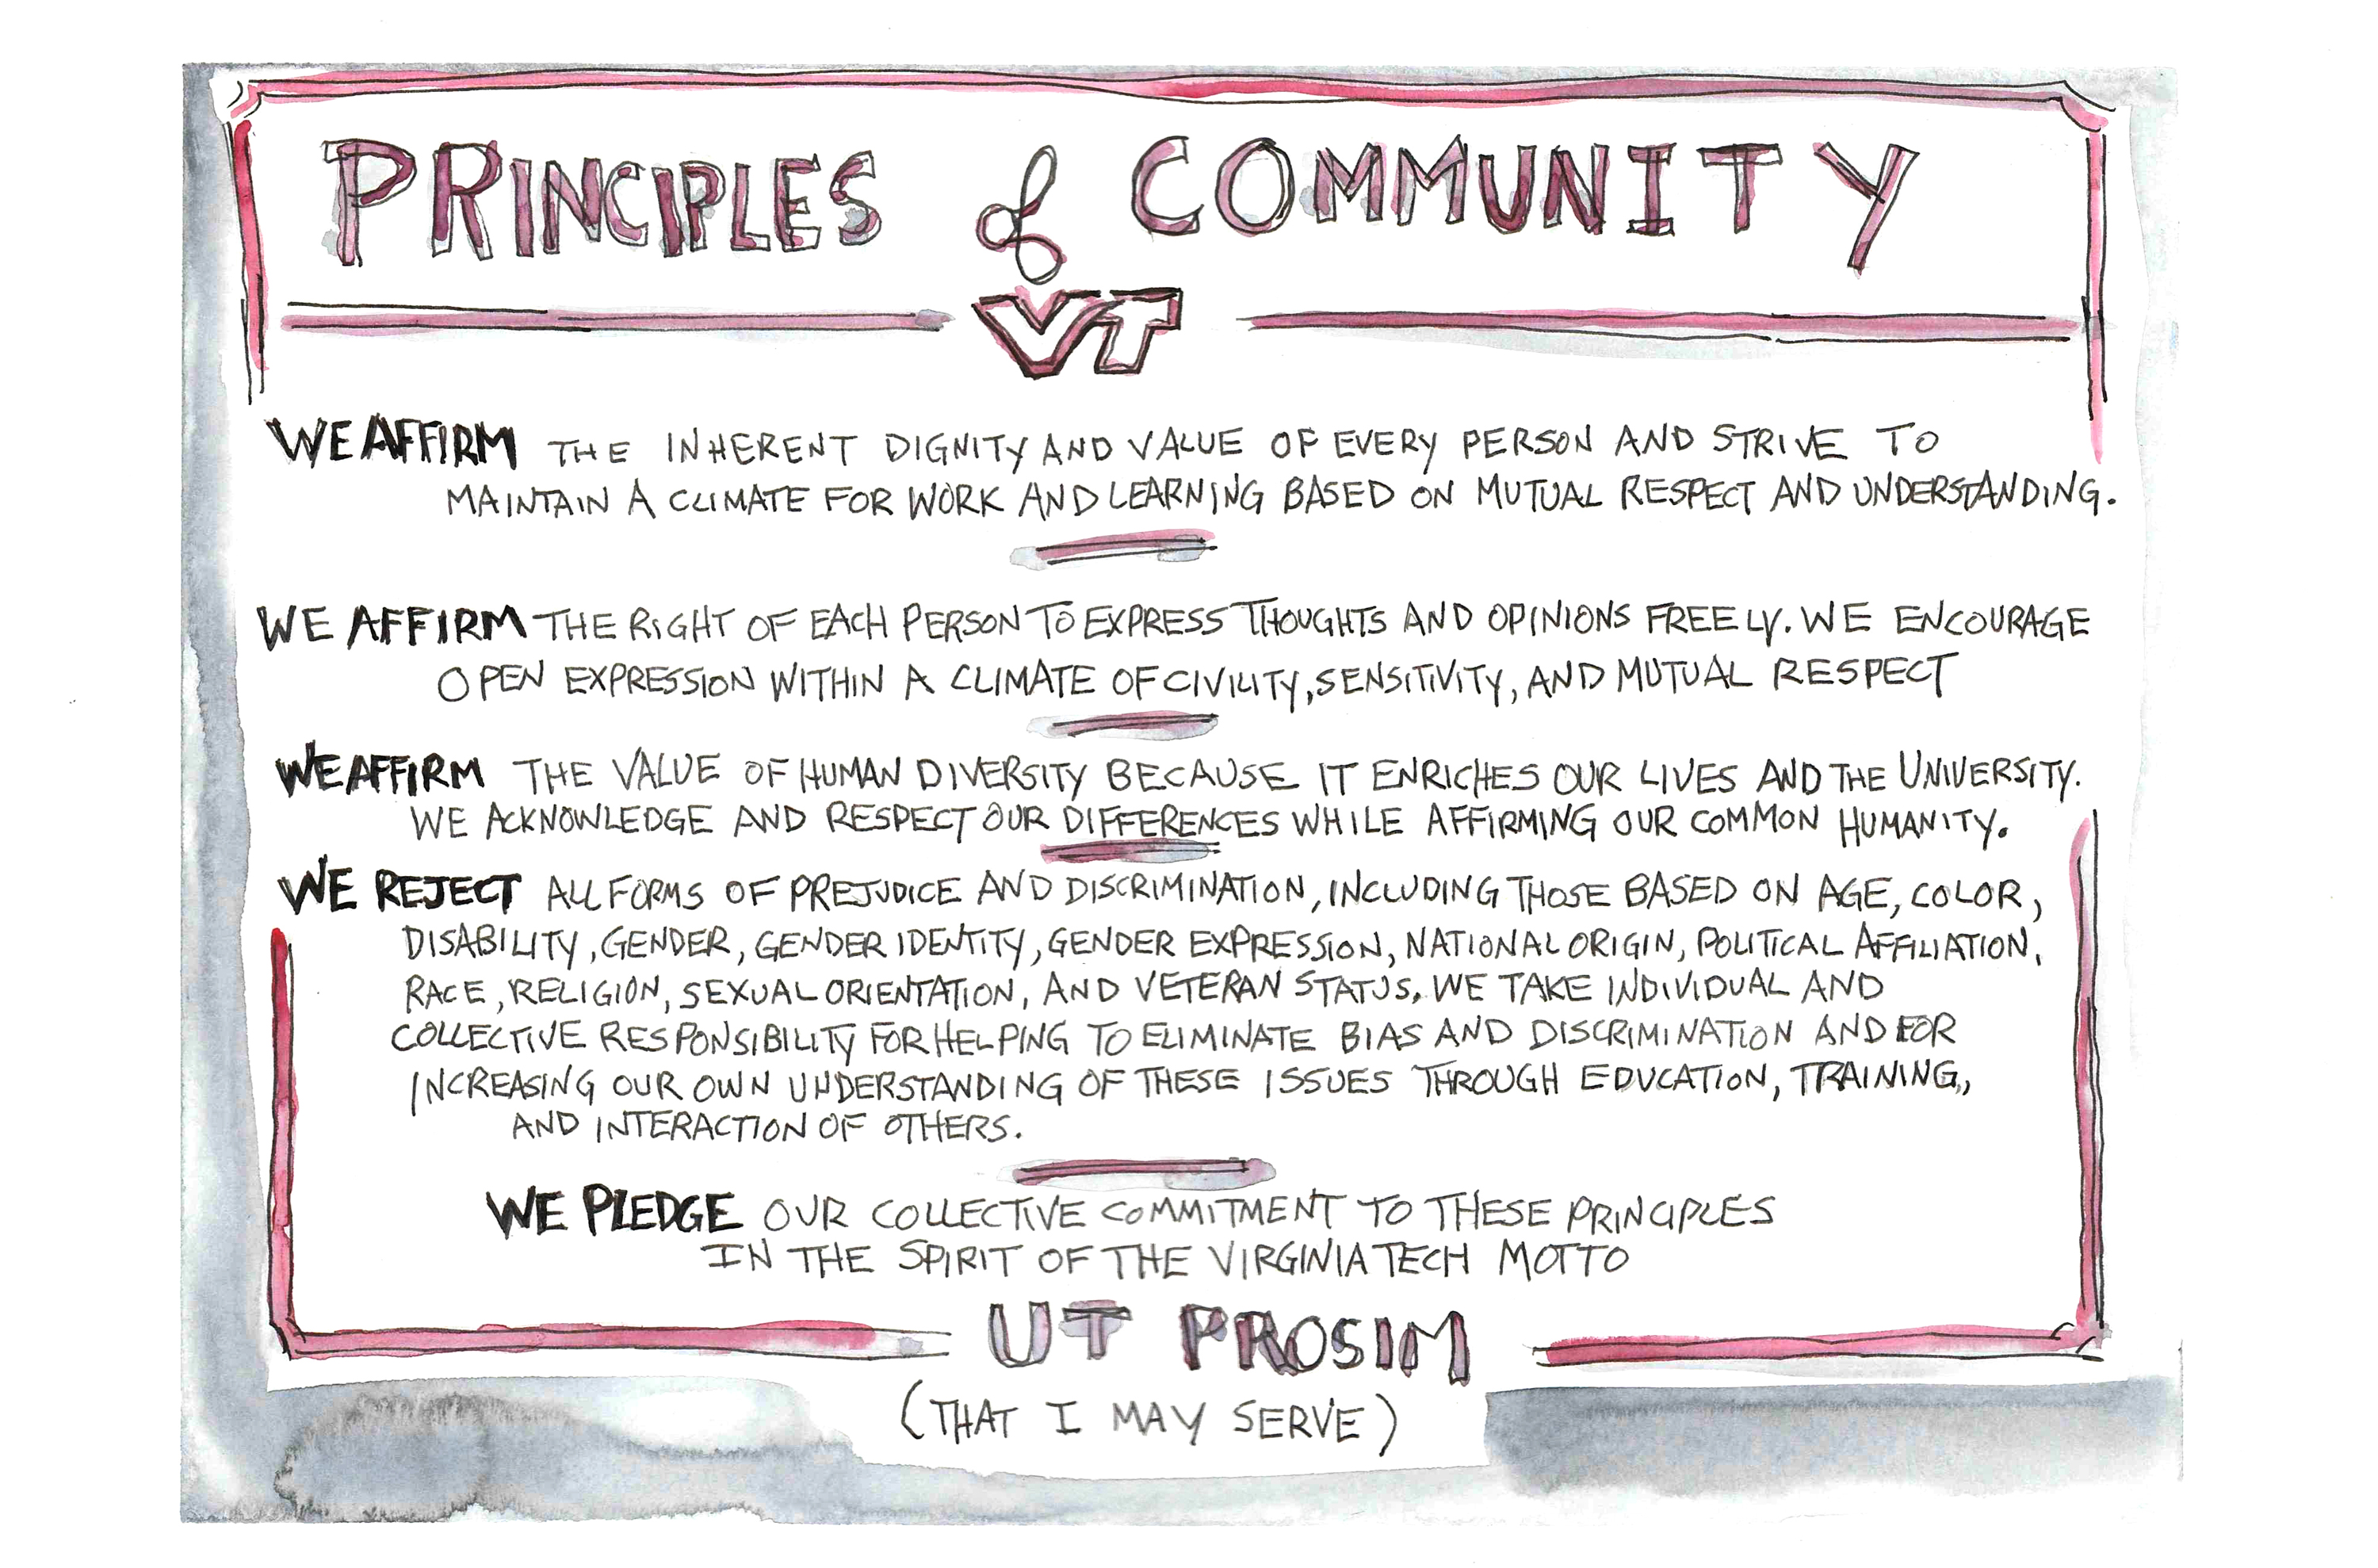 Principles of Community (0092) - Appeared on Jan. 8, 2021